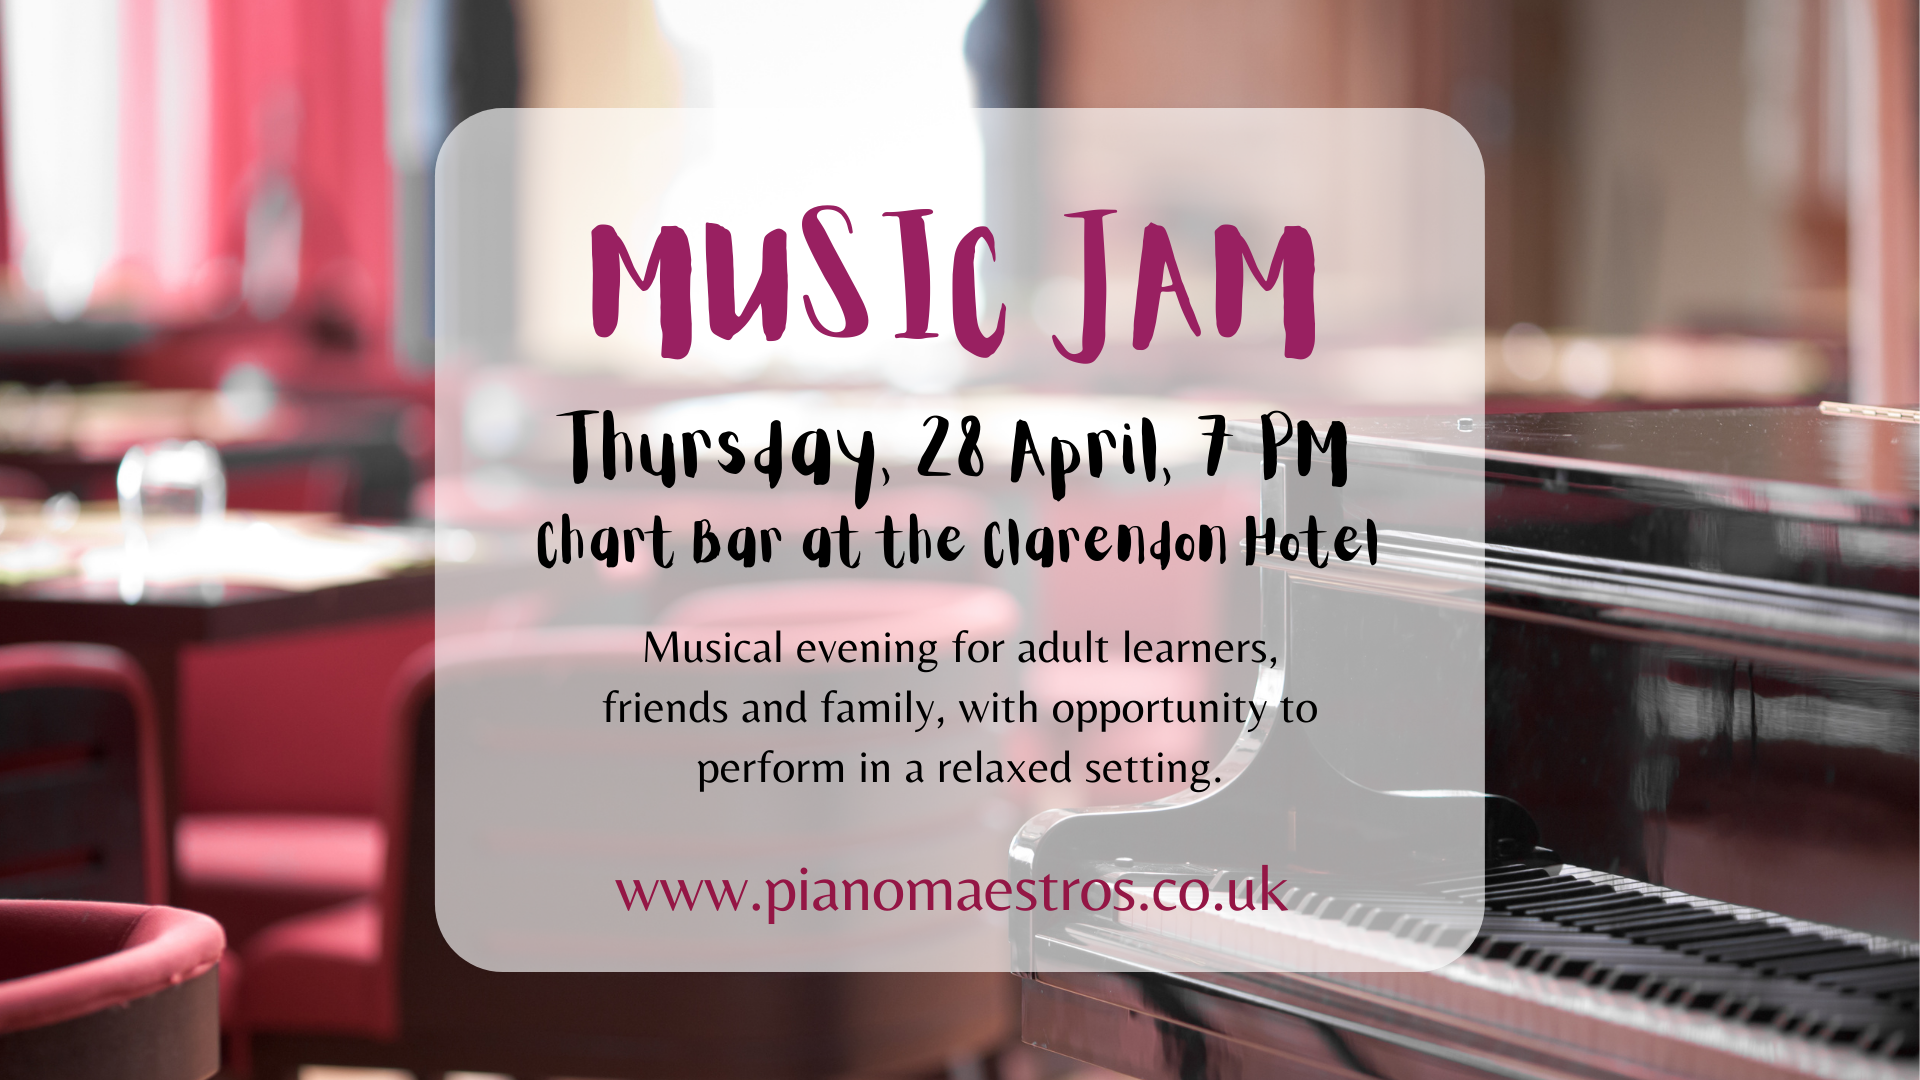 Musical evening for adult learners, with the opportunity to perform in a friendly and relaxed setting. Open to all local amateur musicians, not only Piano Maestros students.